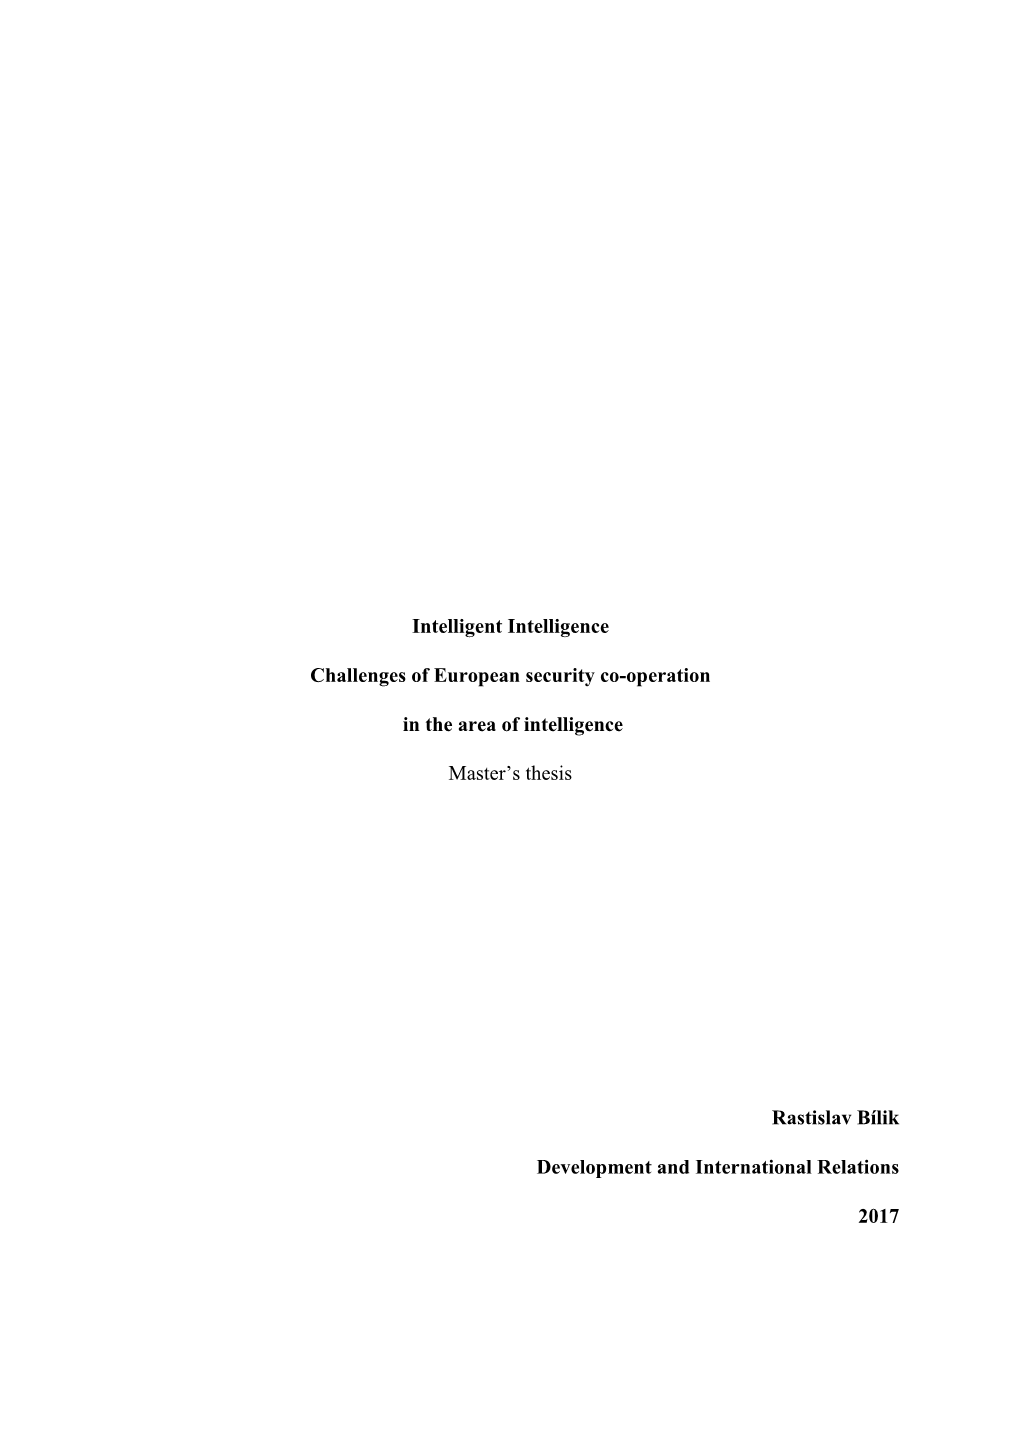 Intelligent Intelligence Challenges of European Security Co-Operation in the Area of Intelligence Master's Thesis Rastislav B